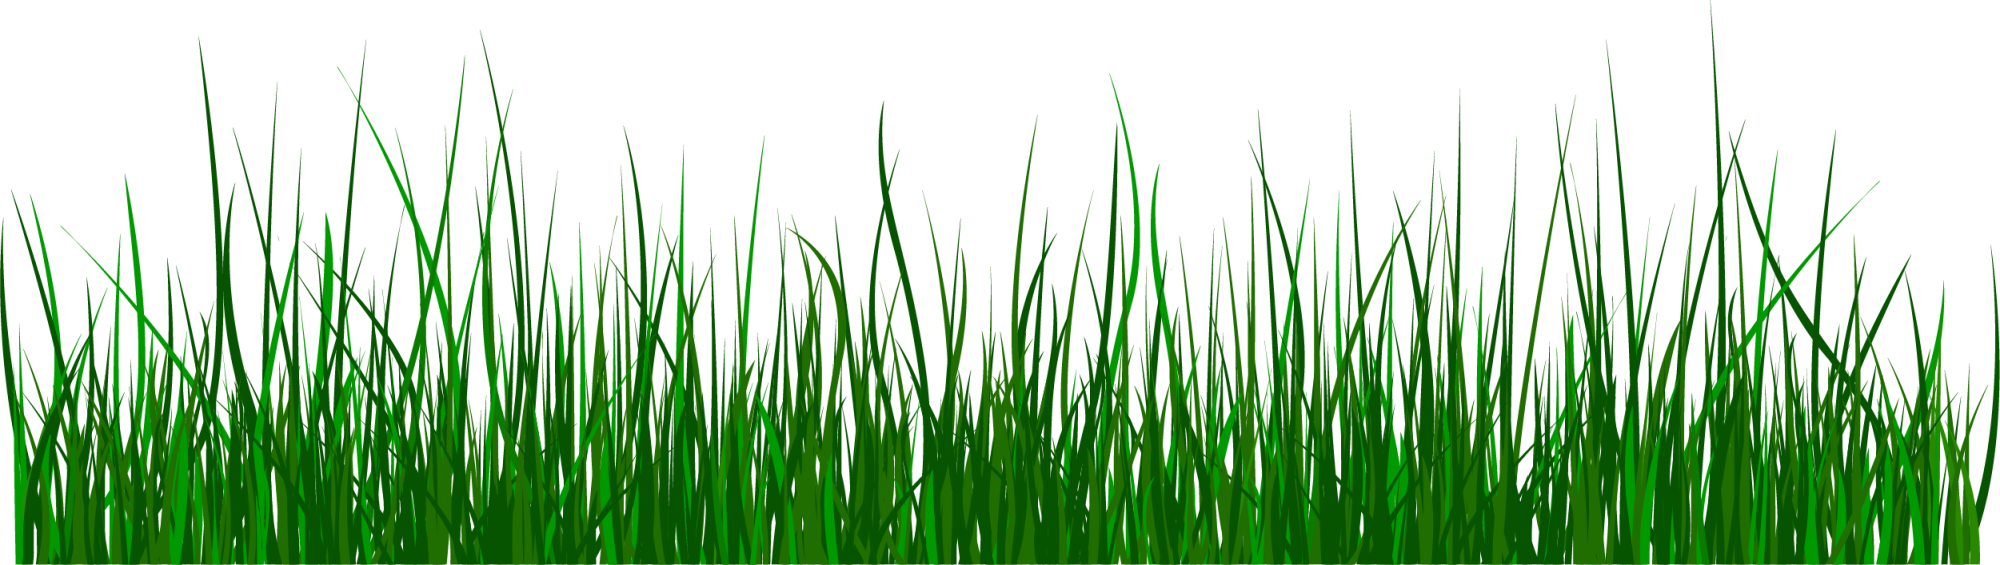 clipart grass simple